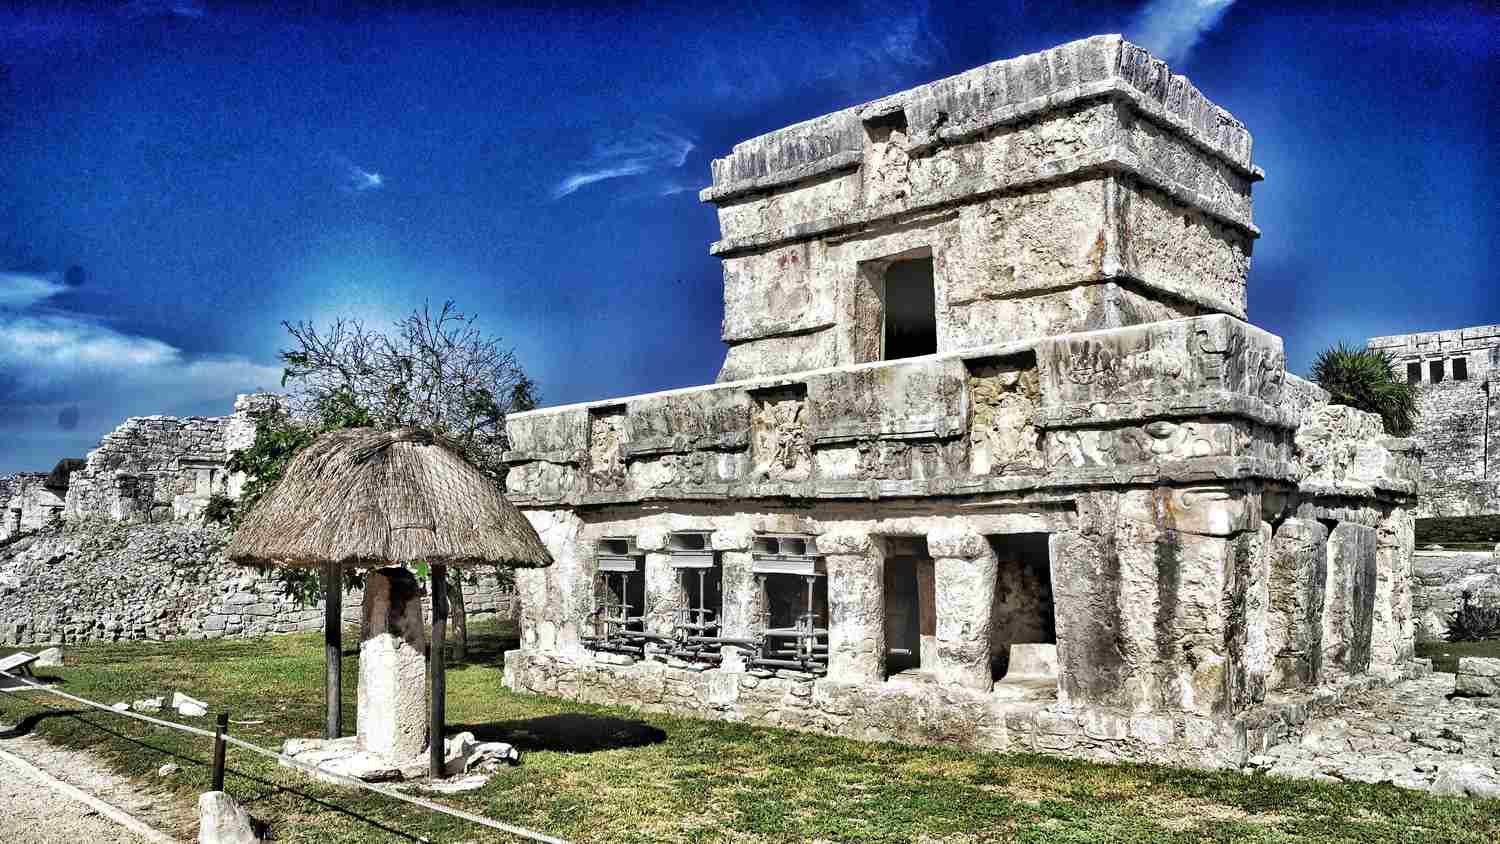 Ruins from the Mayan era that were once part of a huge empire surrounding Playa Del Carmen and the Riviera Maya.